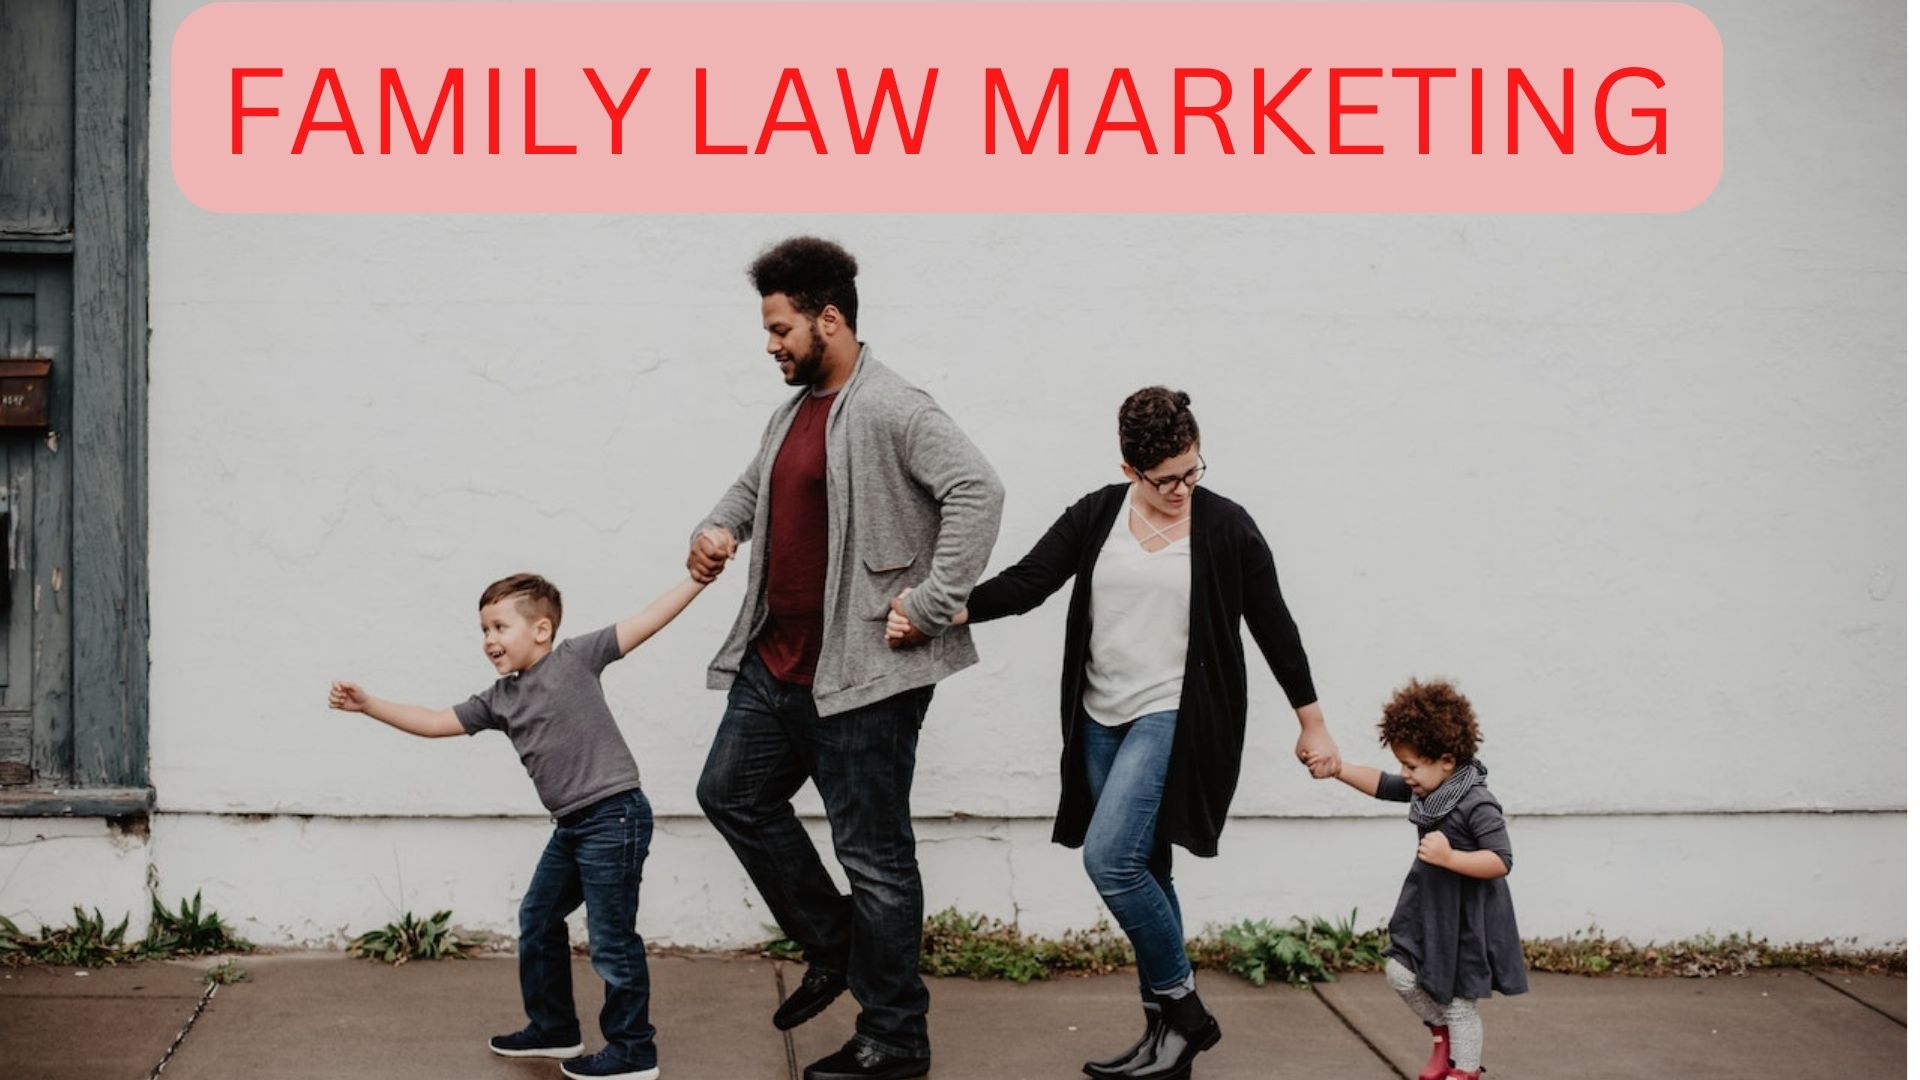 Family Law Marketing - How Can Marketing Helps Law Firms